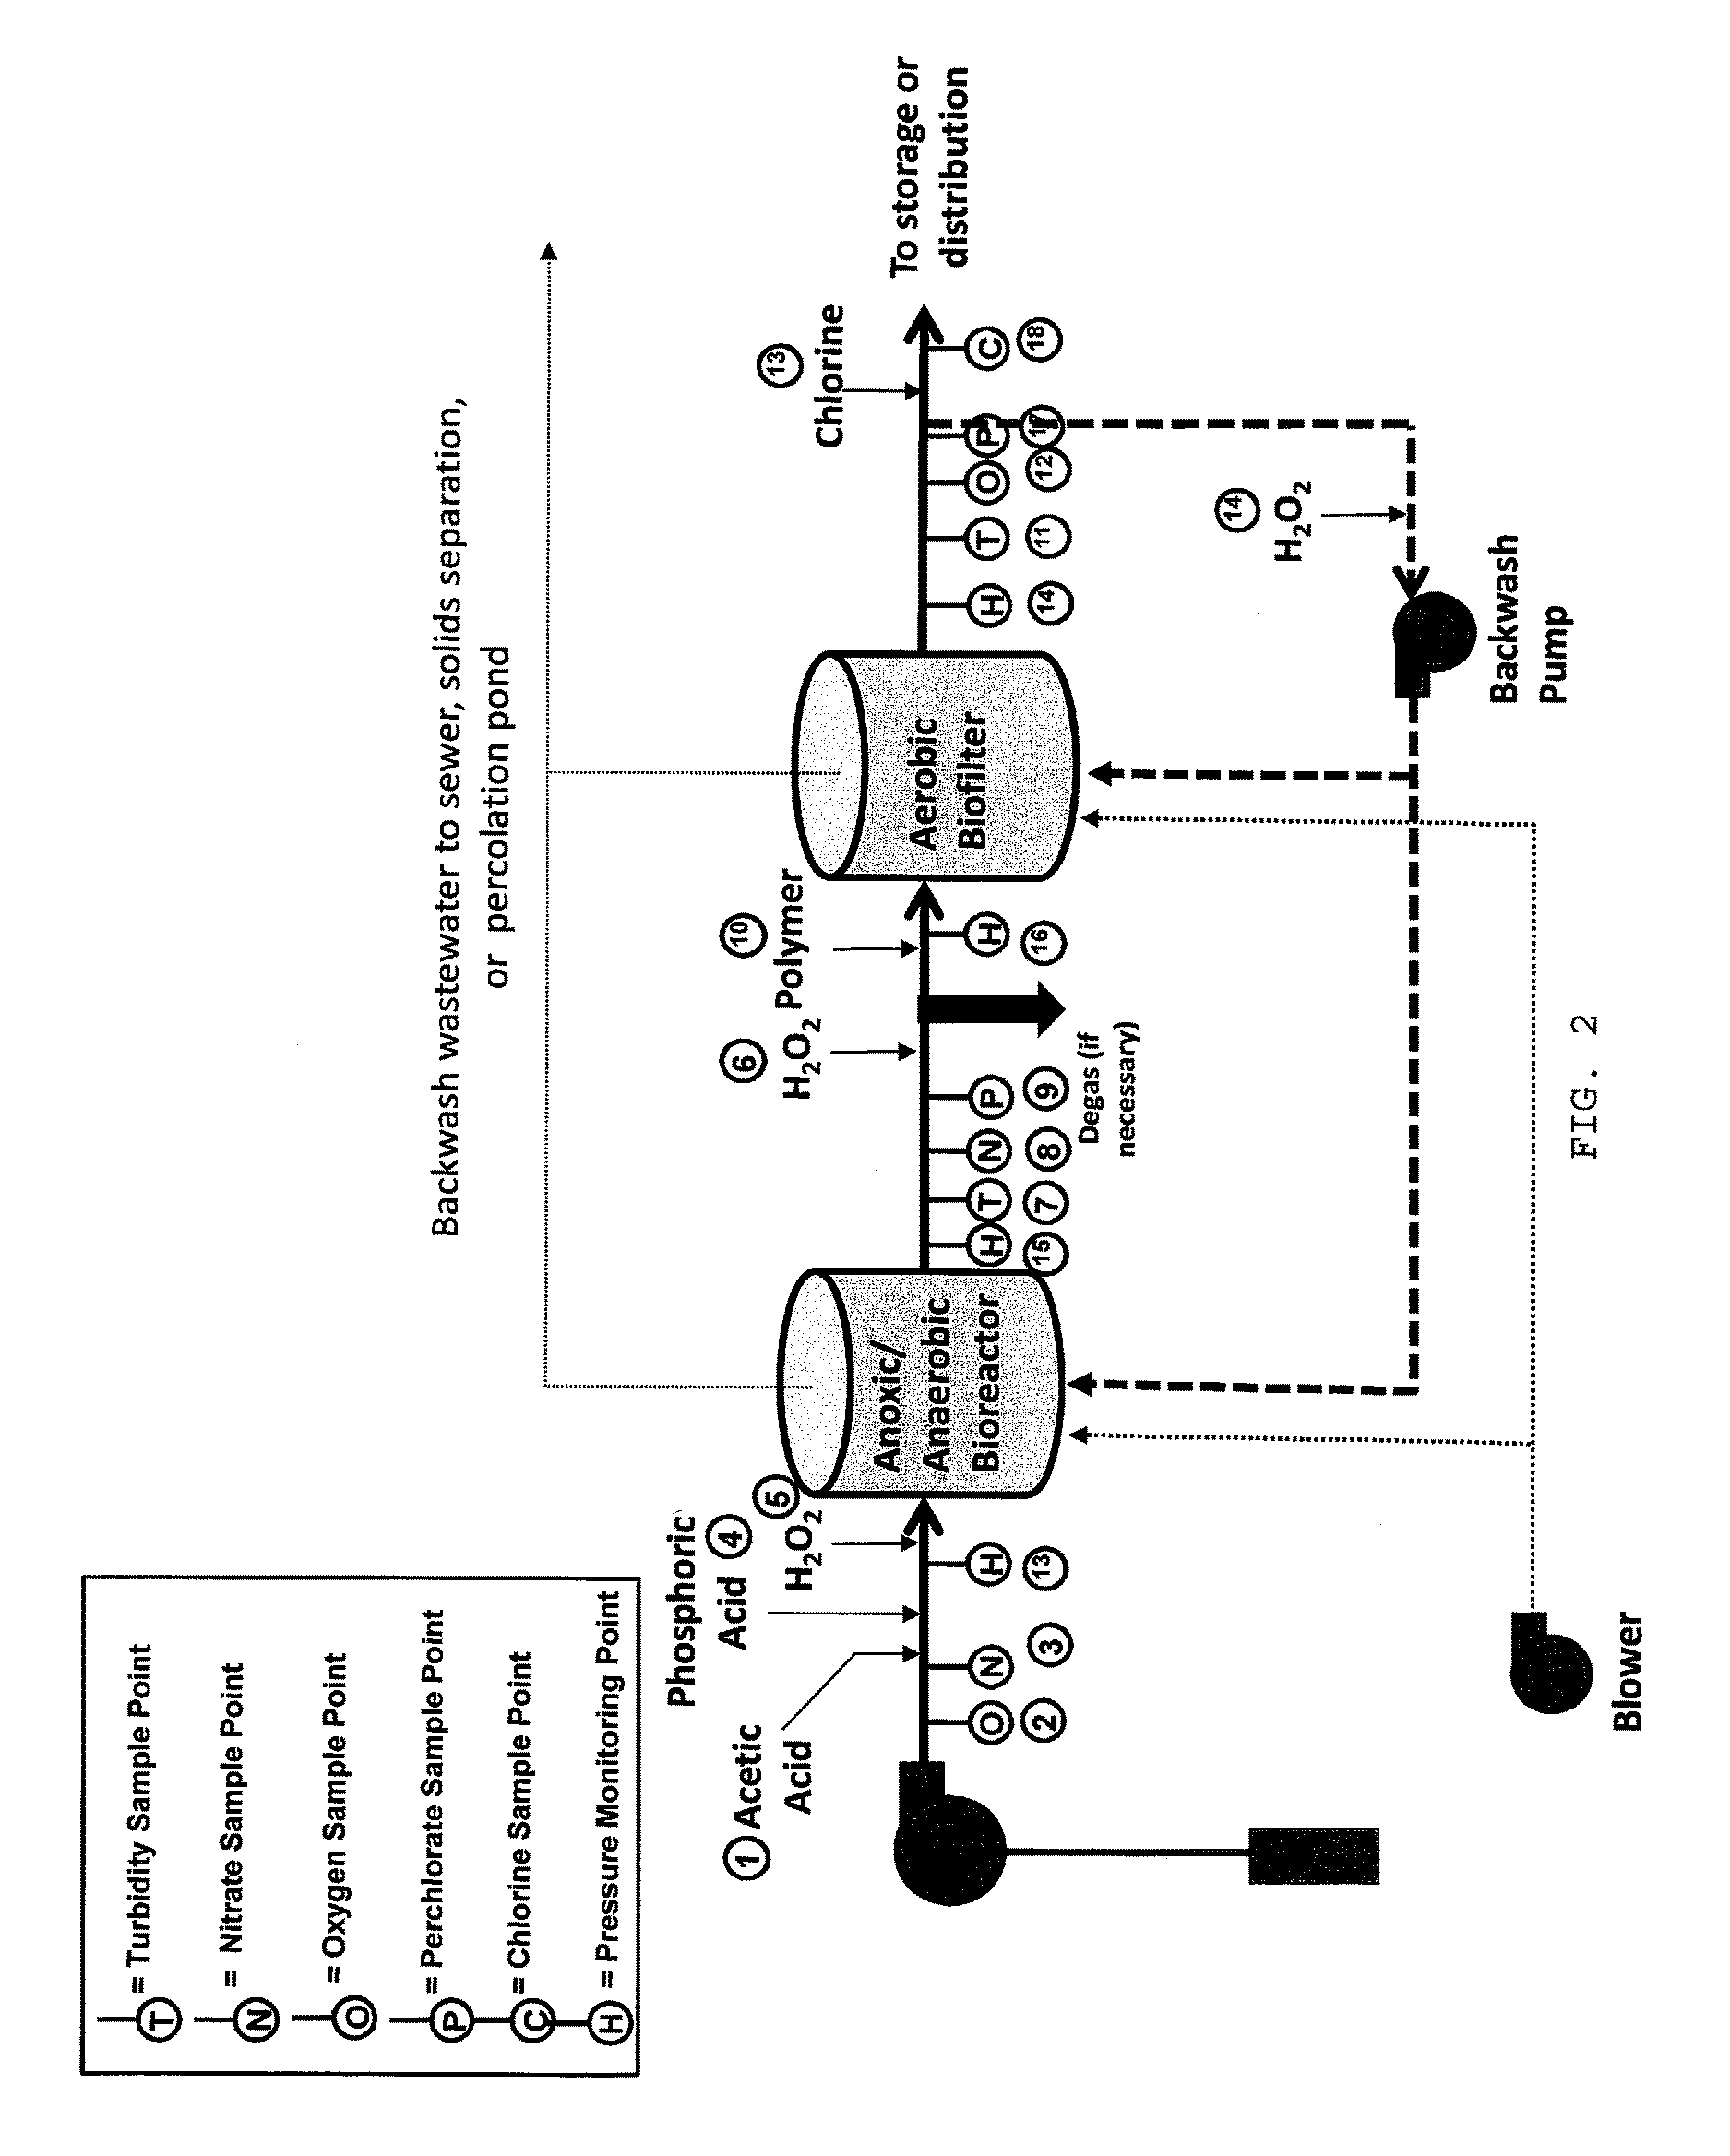 Biological two-stage contaminated water treatment system and process